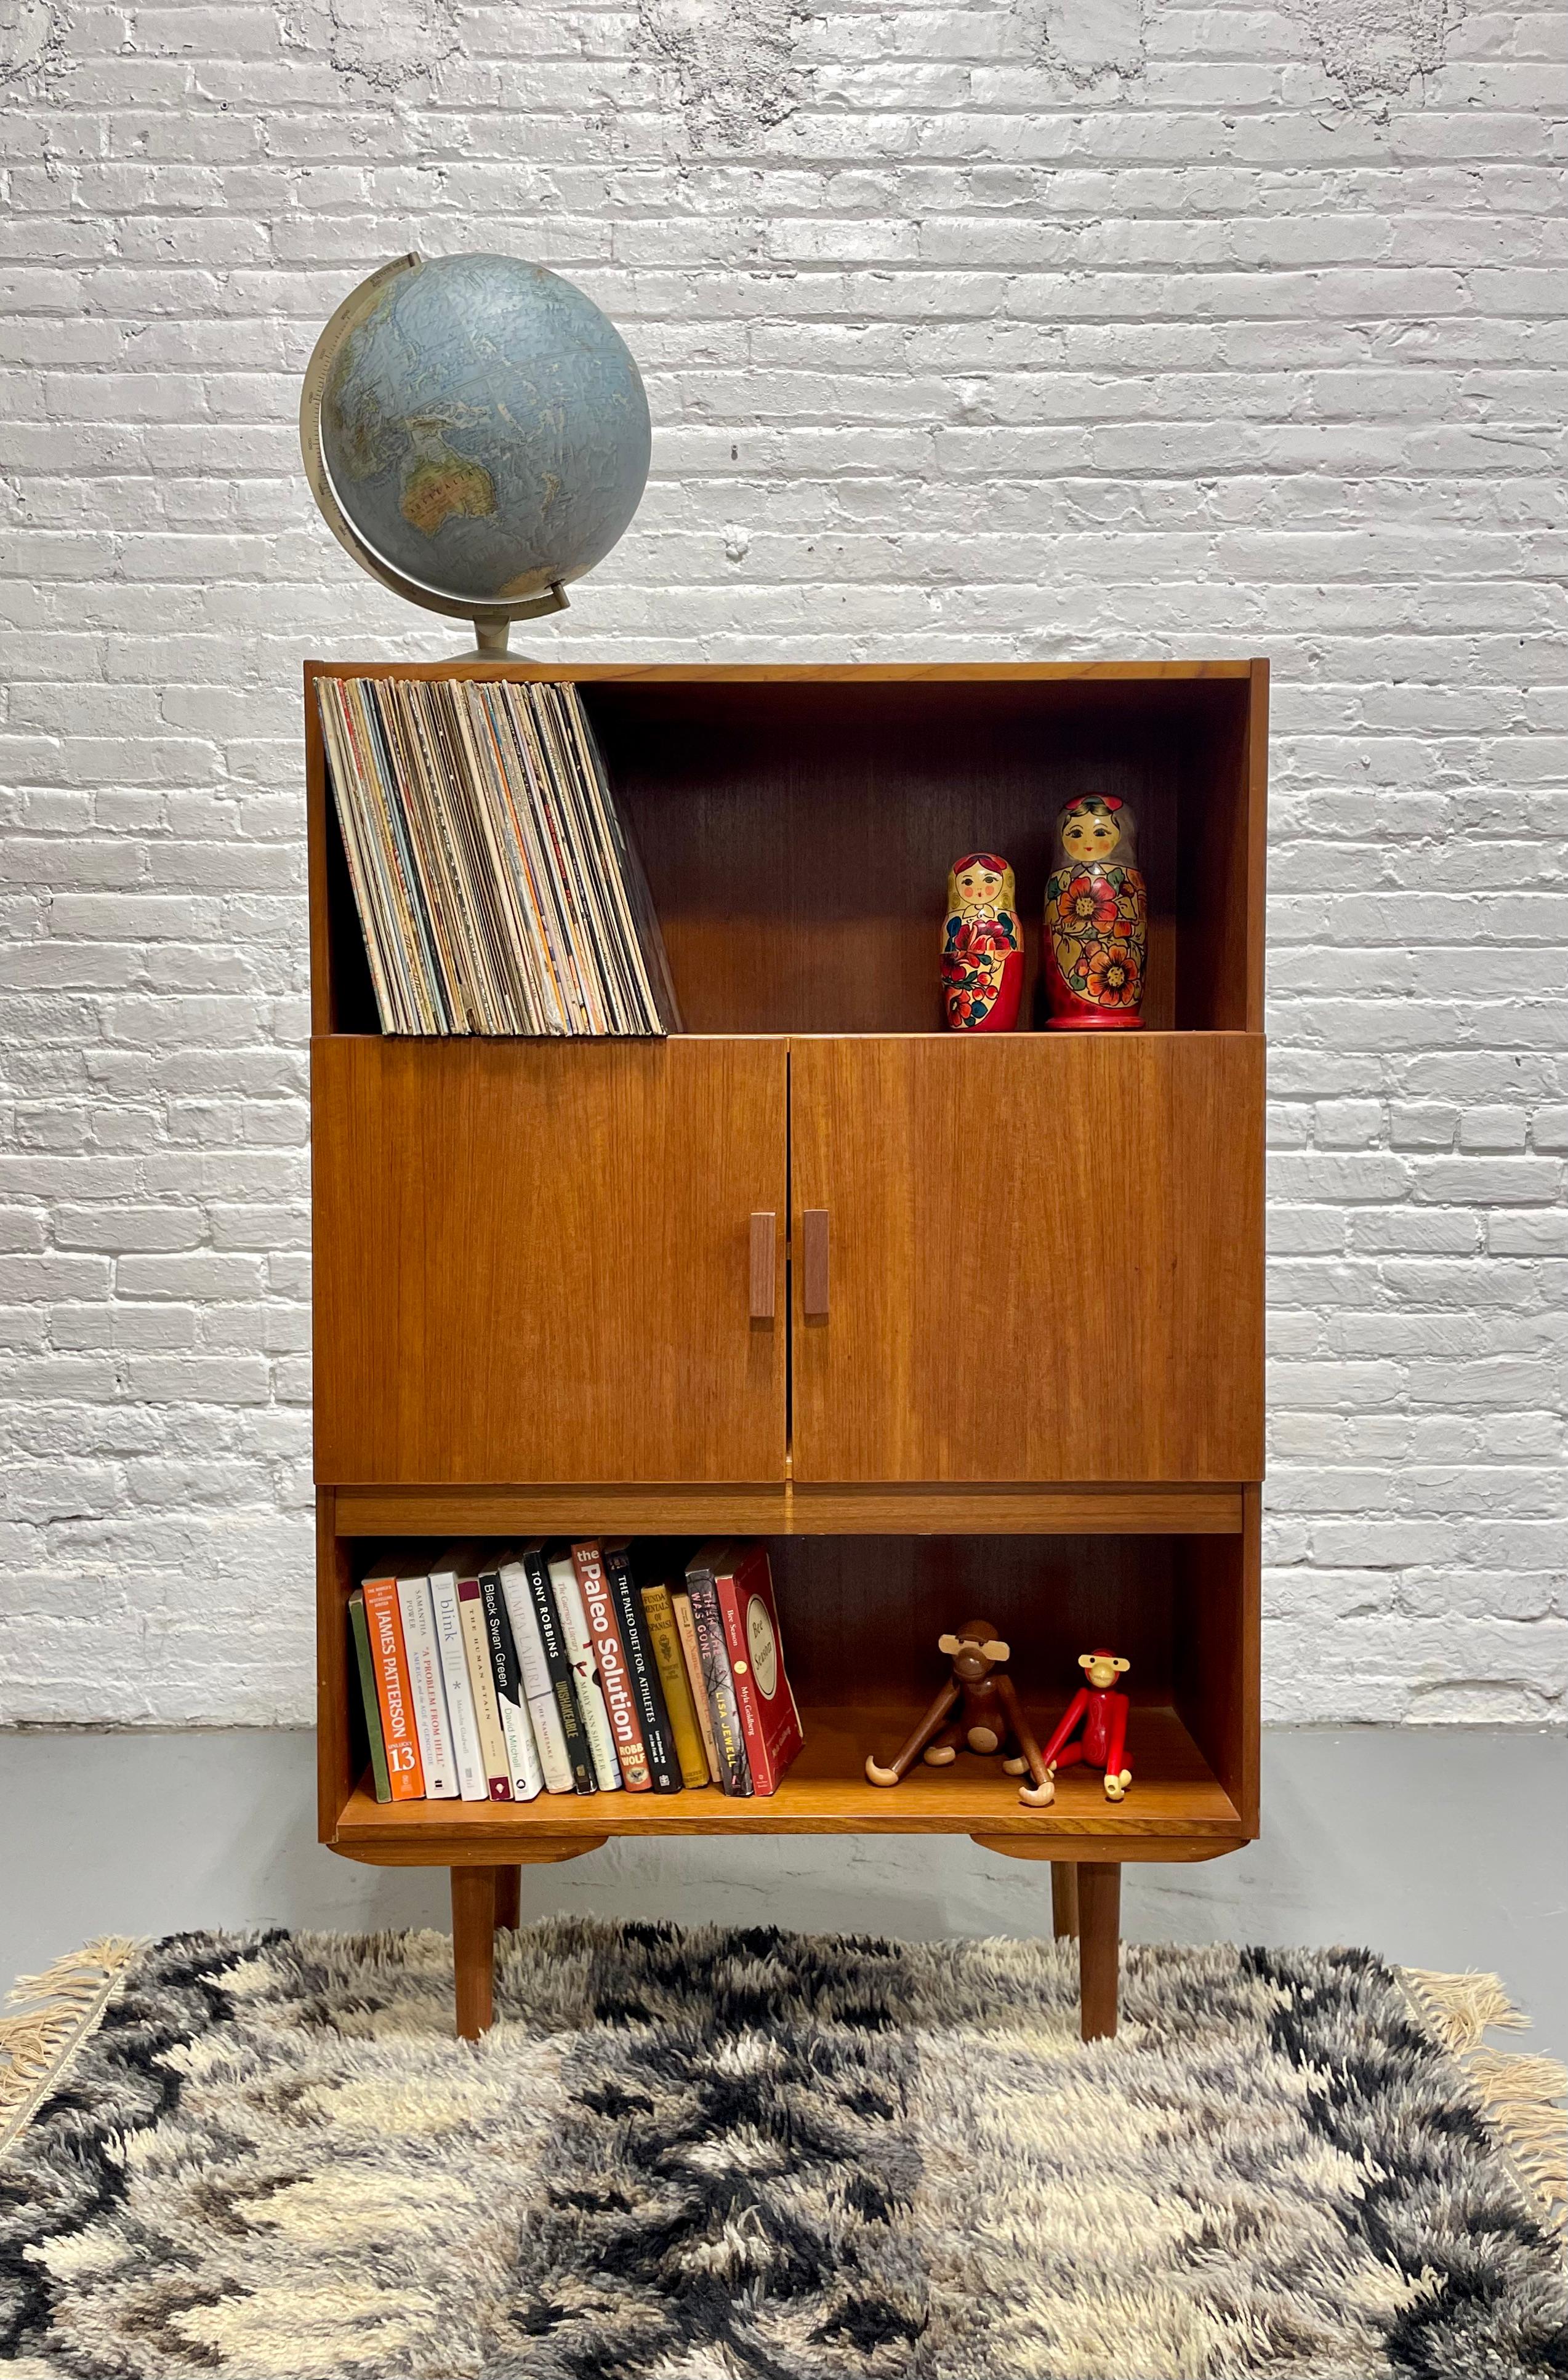 Danish Mid Century Modern Teak Bookcase / Liquor Bar Cabinet, c. 1960’s.  Loads of storage for all your books and collectables or vinyl collection across the top.   Plenty of storage options which allow some areas to be exposed and some hidden